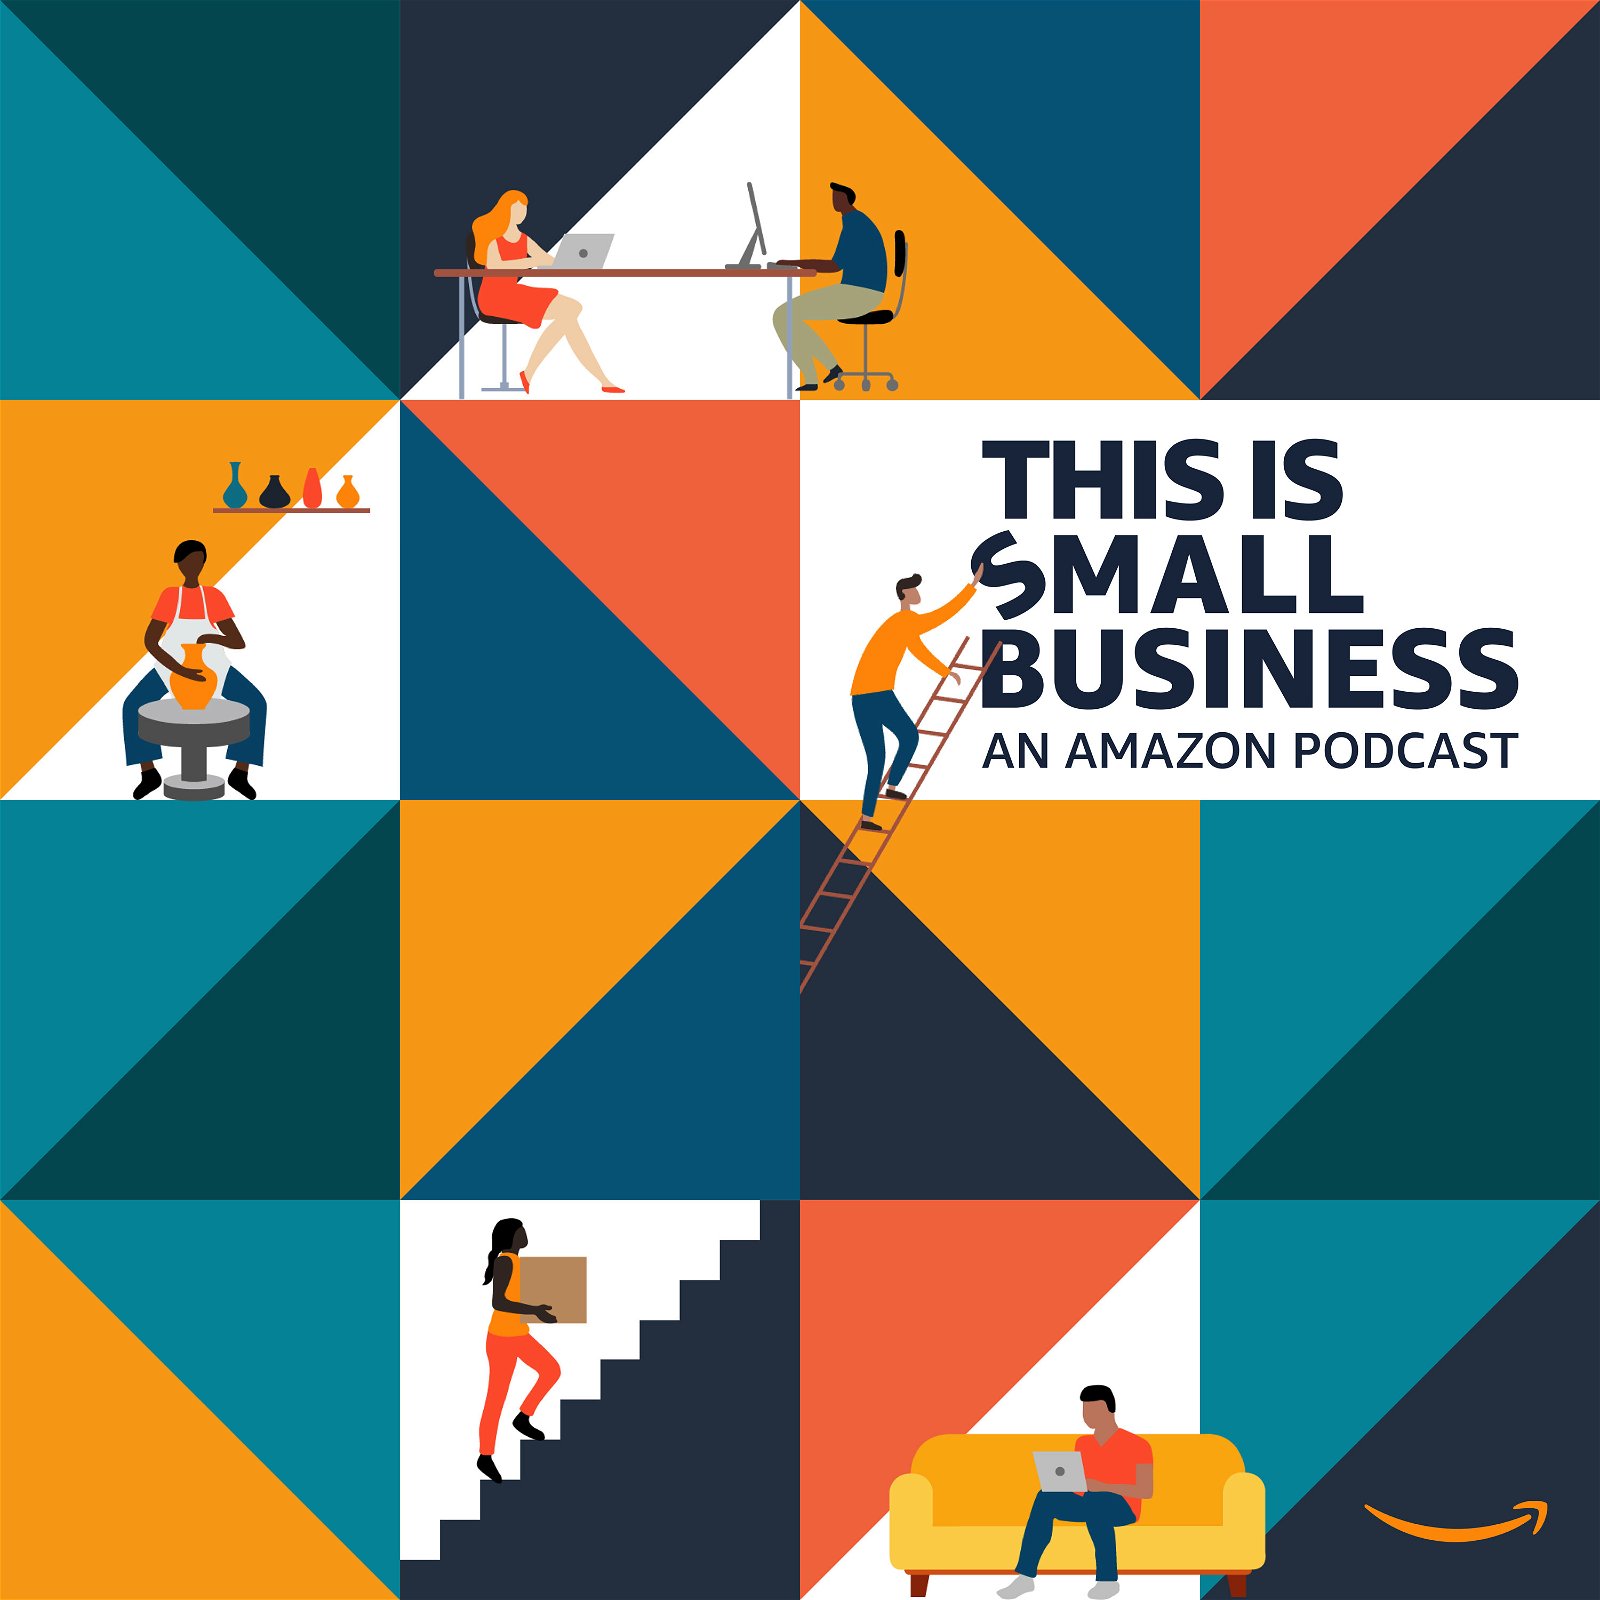 Introducing Season 3 of This is Small Business